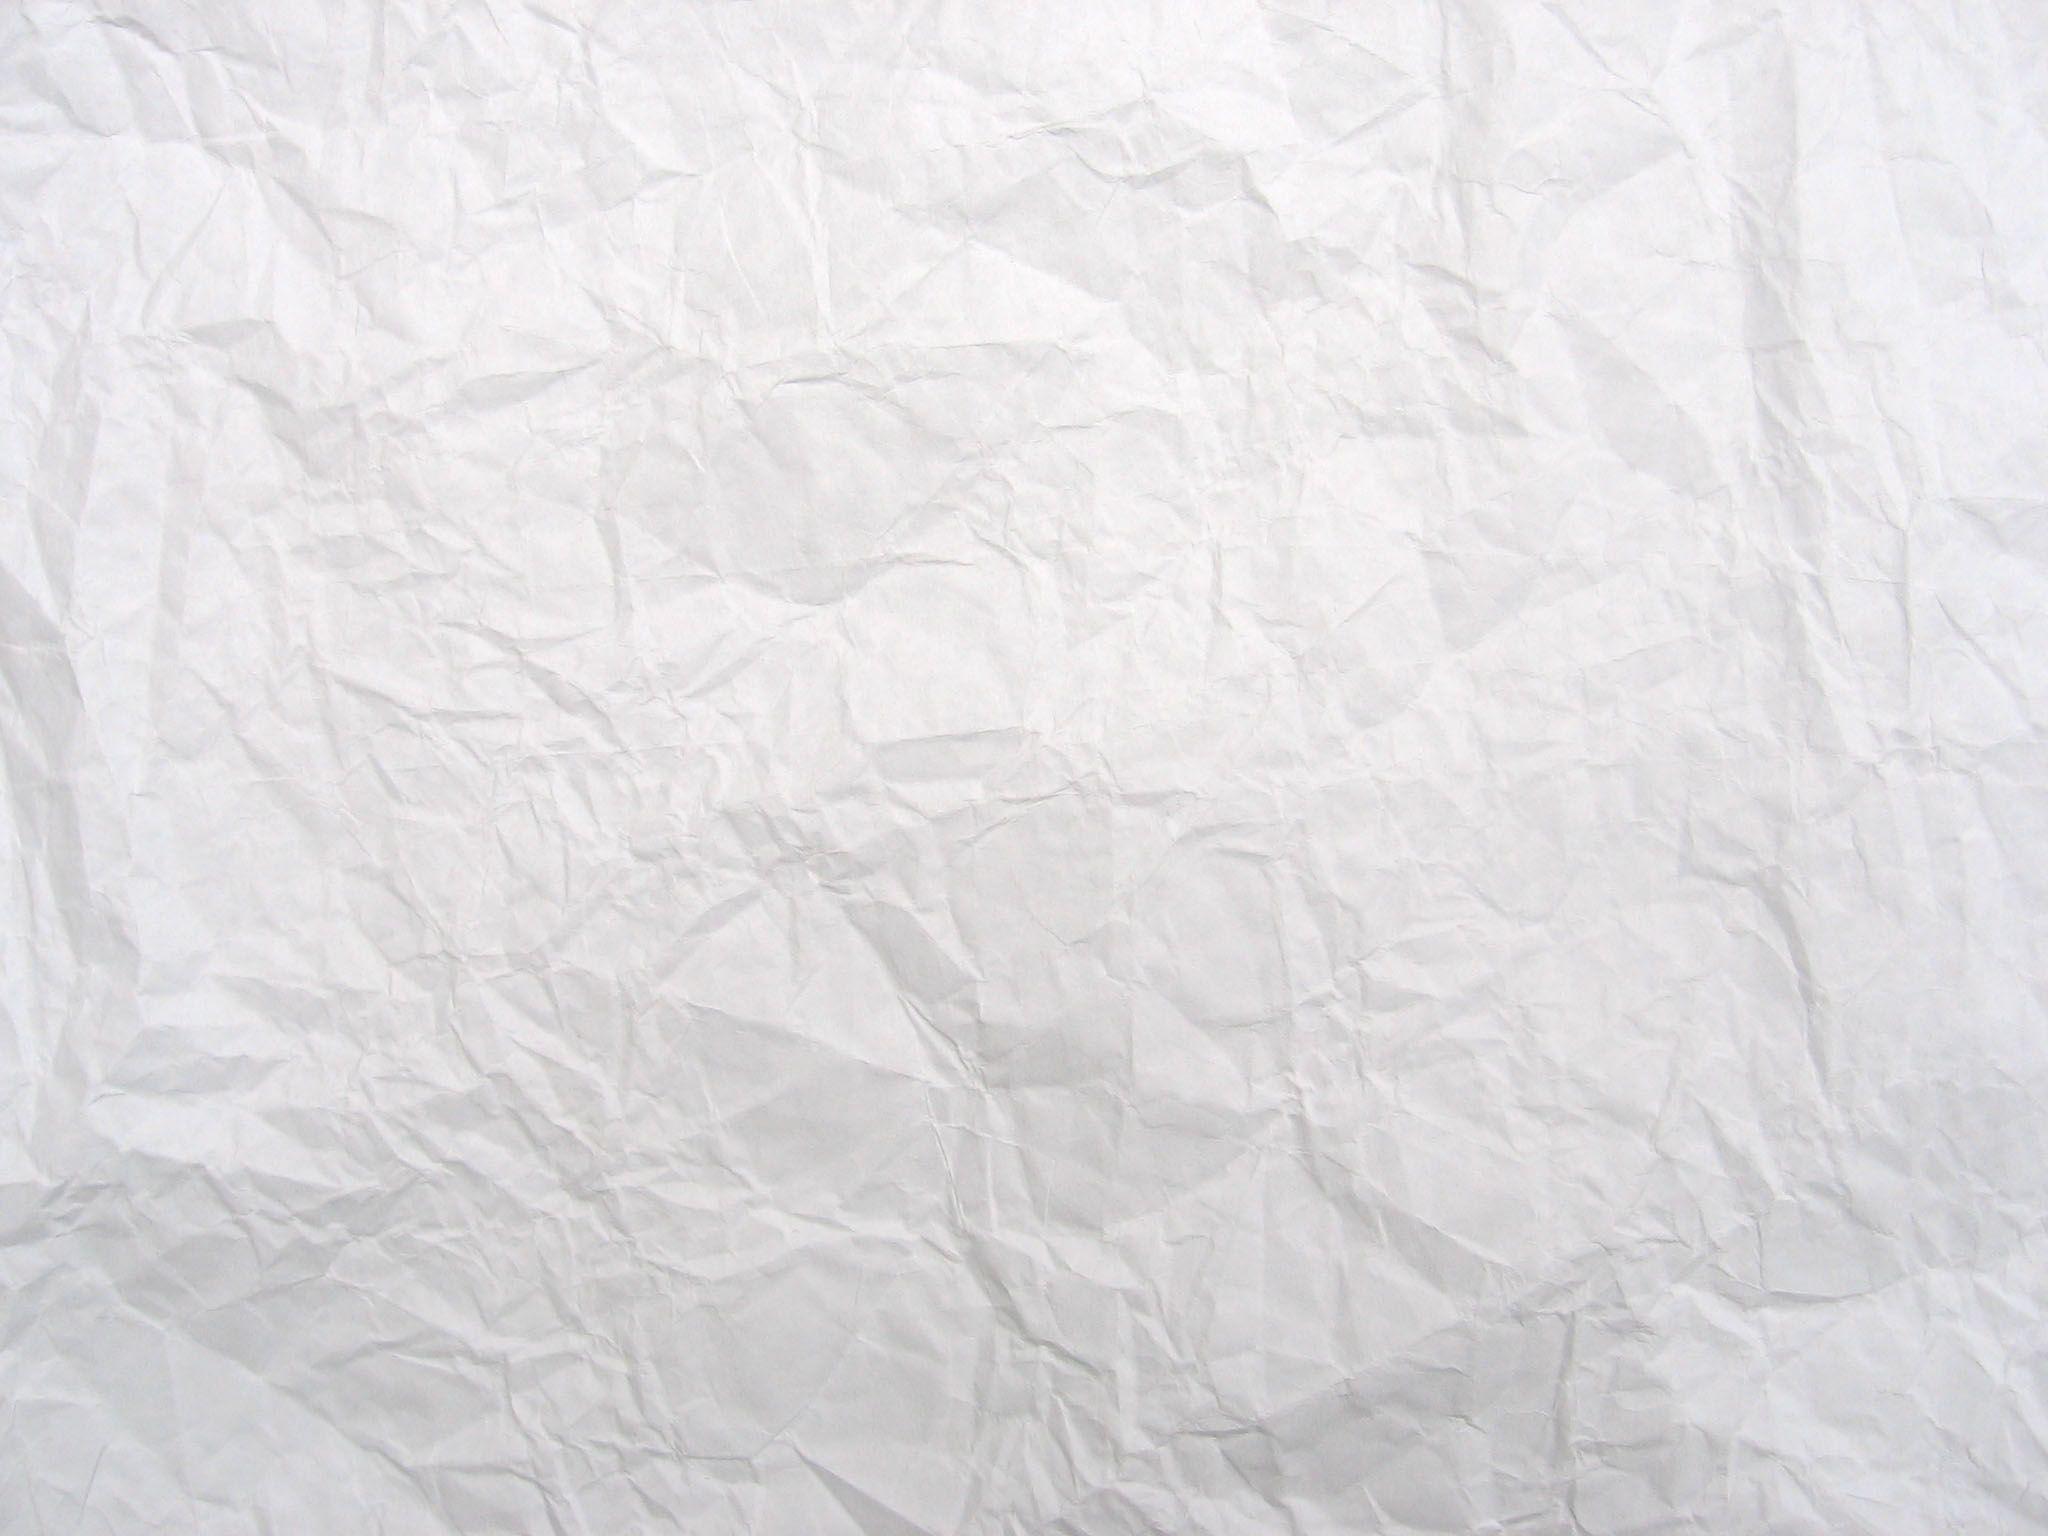 a paper structure, paper texture, the old rumpled paper to download